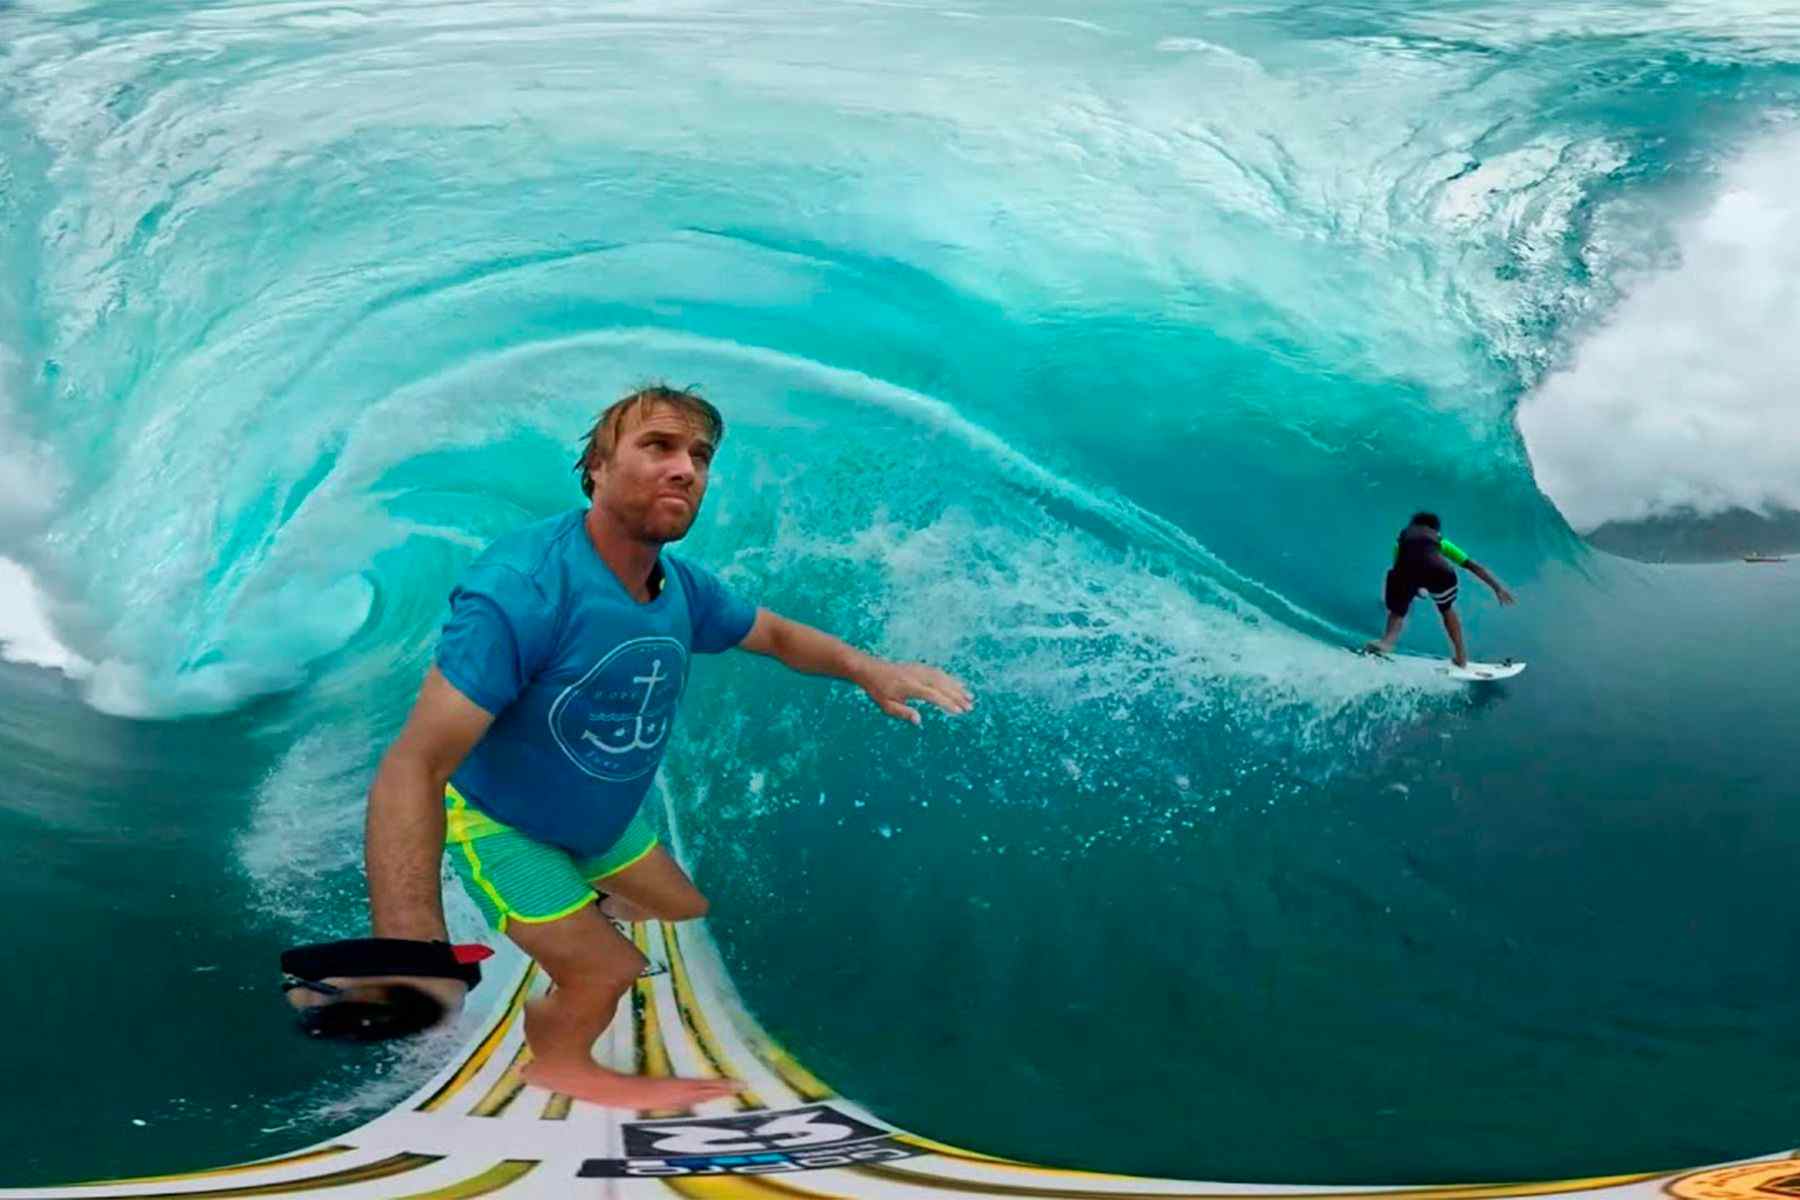 Frame grab from a 360 virtual reality film by surfer anthony walsh surfing in tahiti